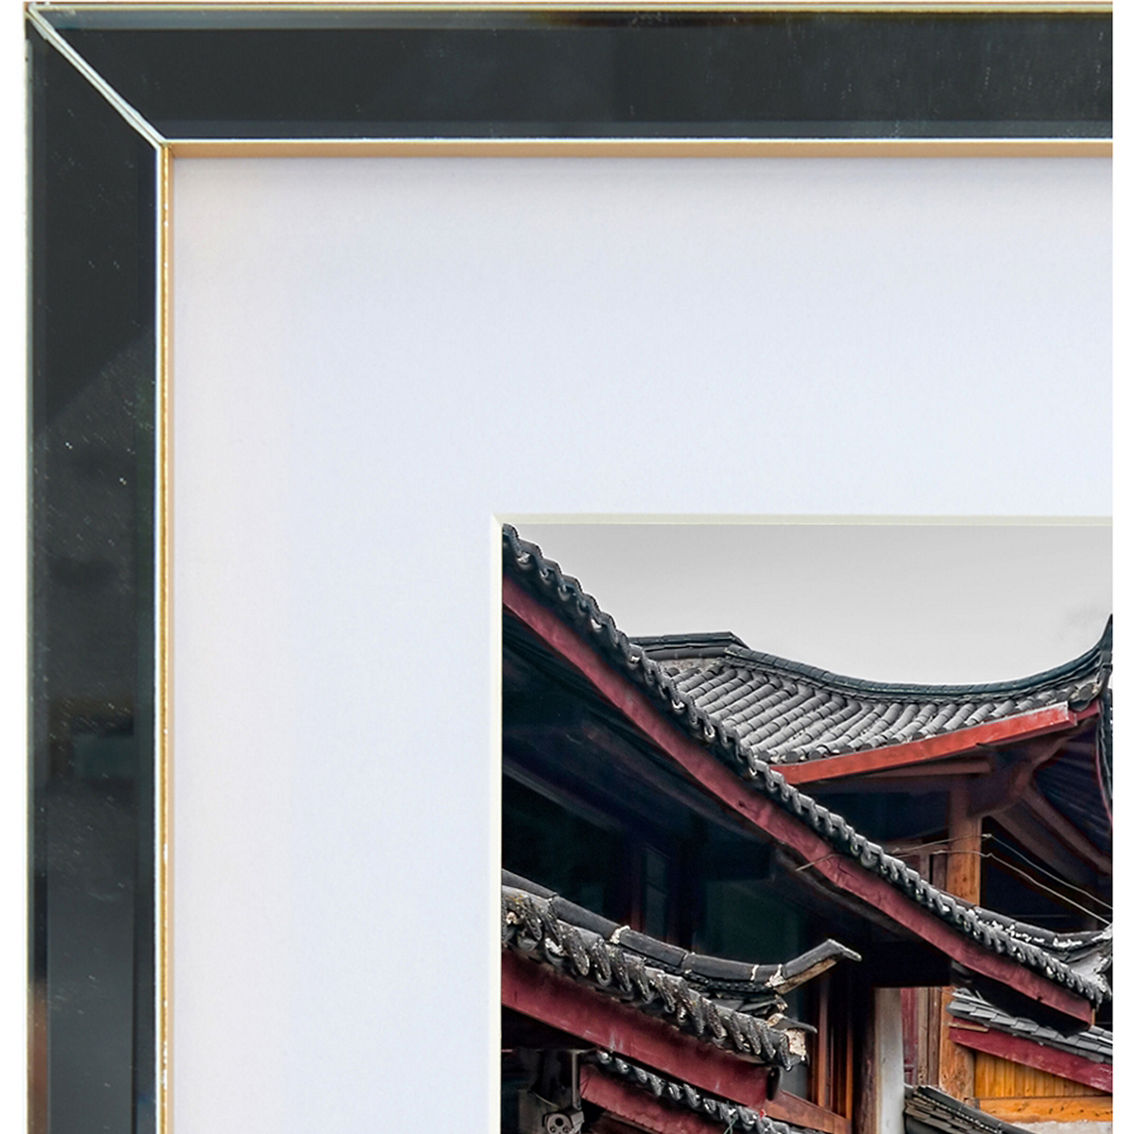 Mikasa Home 8 in. x 10 in. and 11 in. x 14 in. Mirror Gallery Frame with Gold Sides - Image 4 of 6